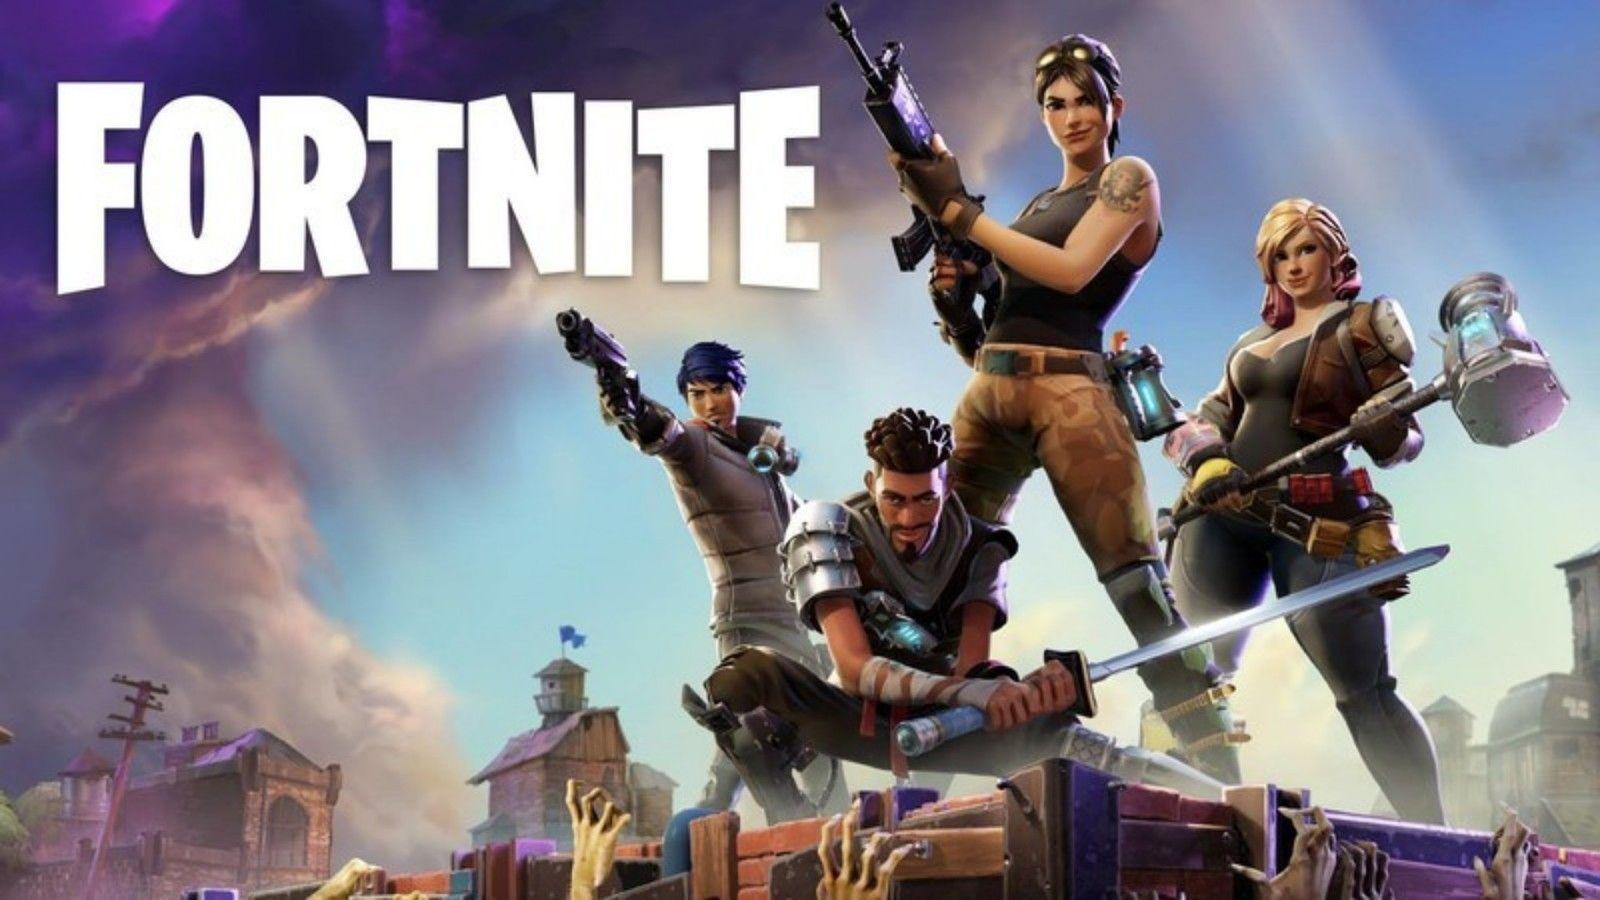 Should you buy Fortnite for PS4, or is the free version good enough